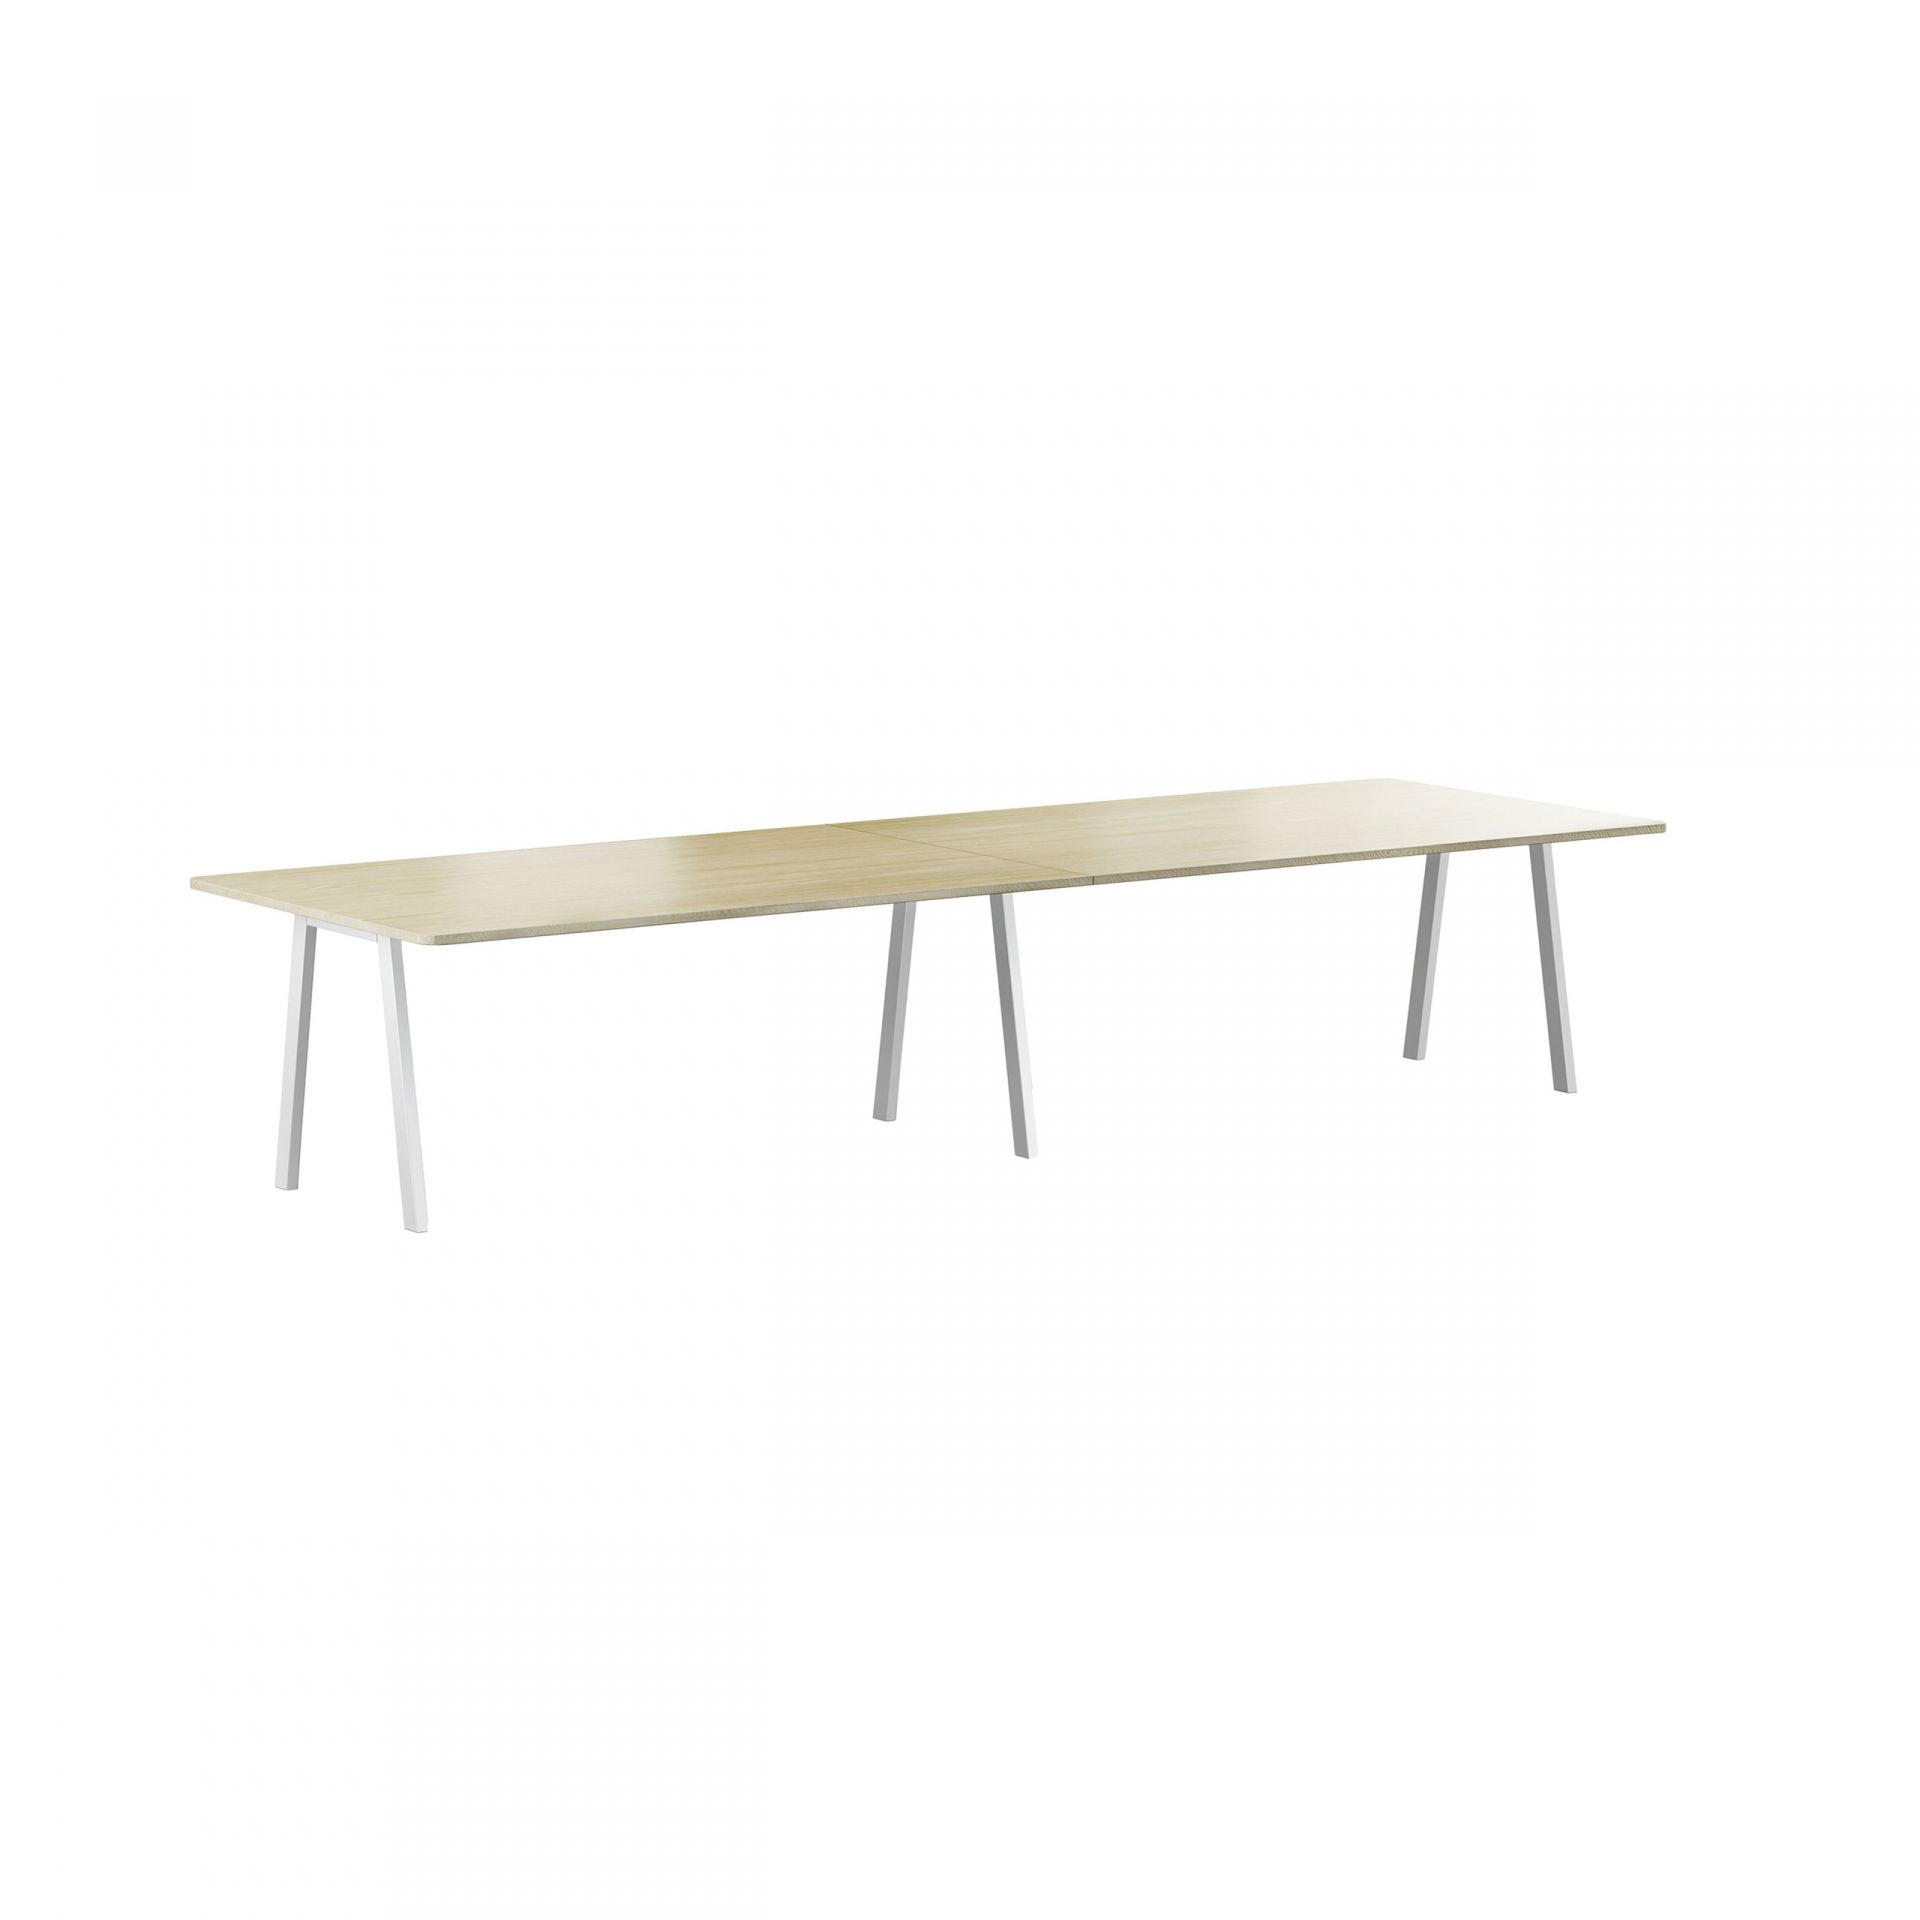 Collaborate Table with metal legs product image 1